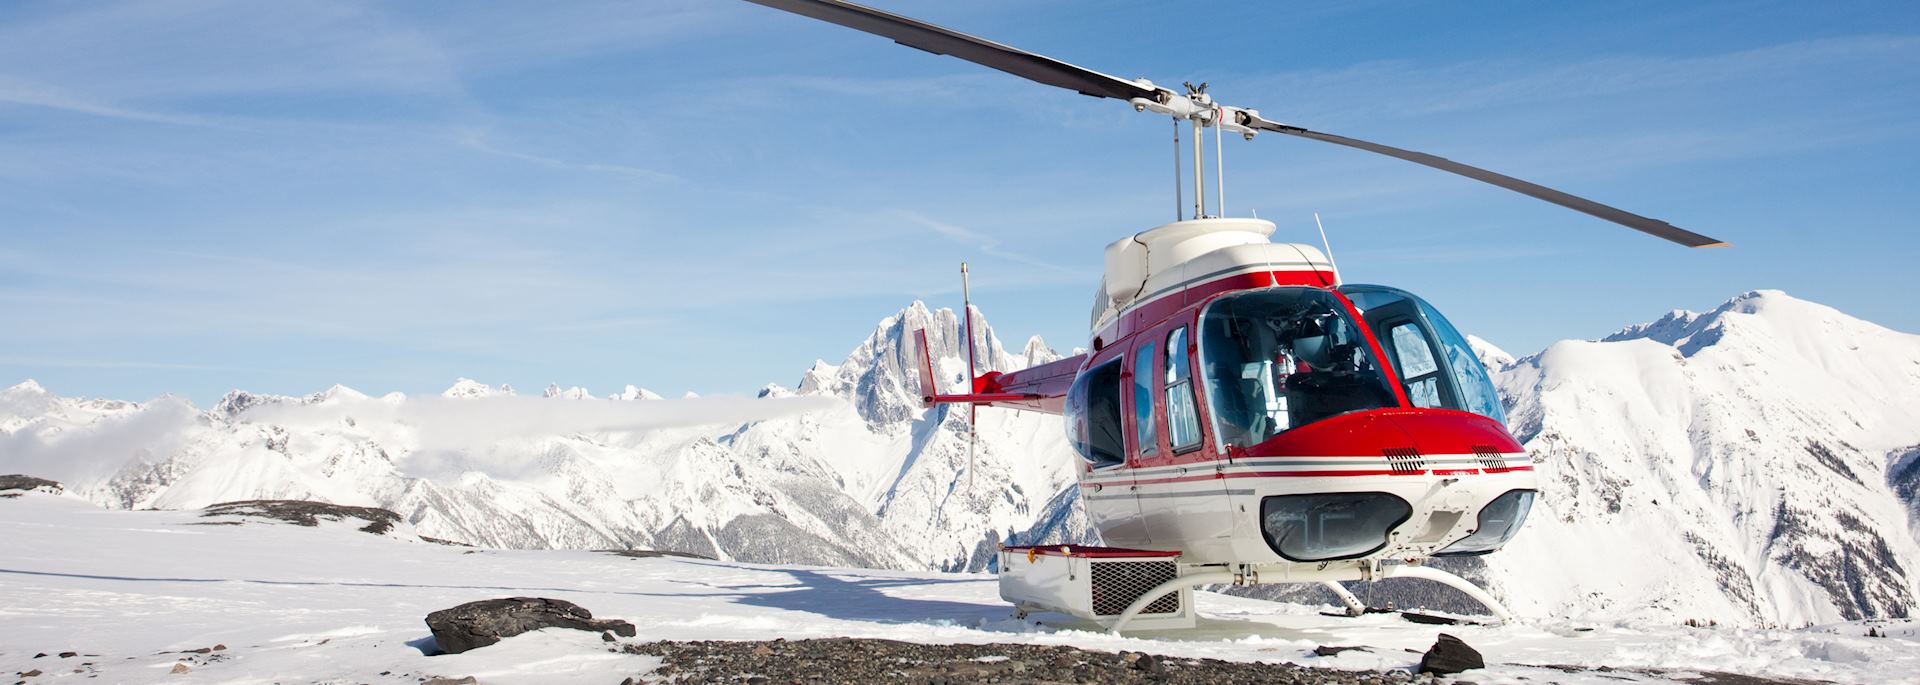 Whistler helicopter tour